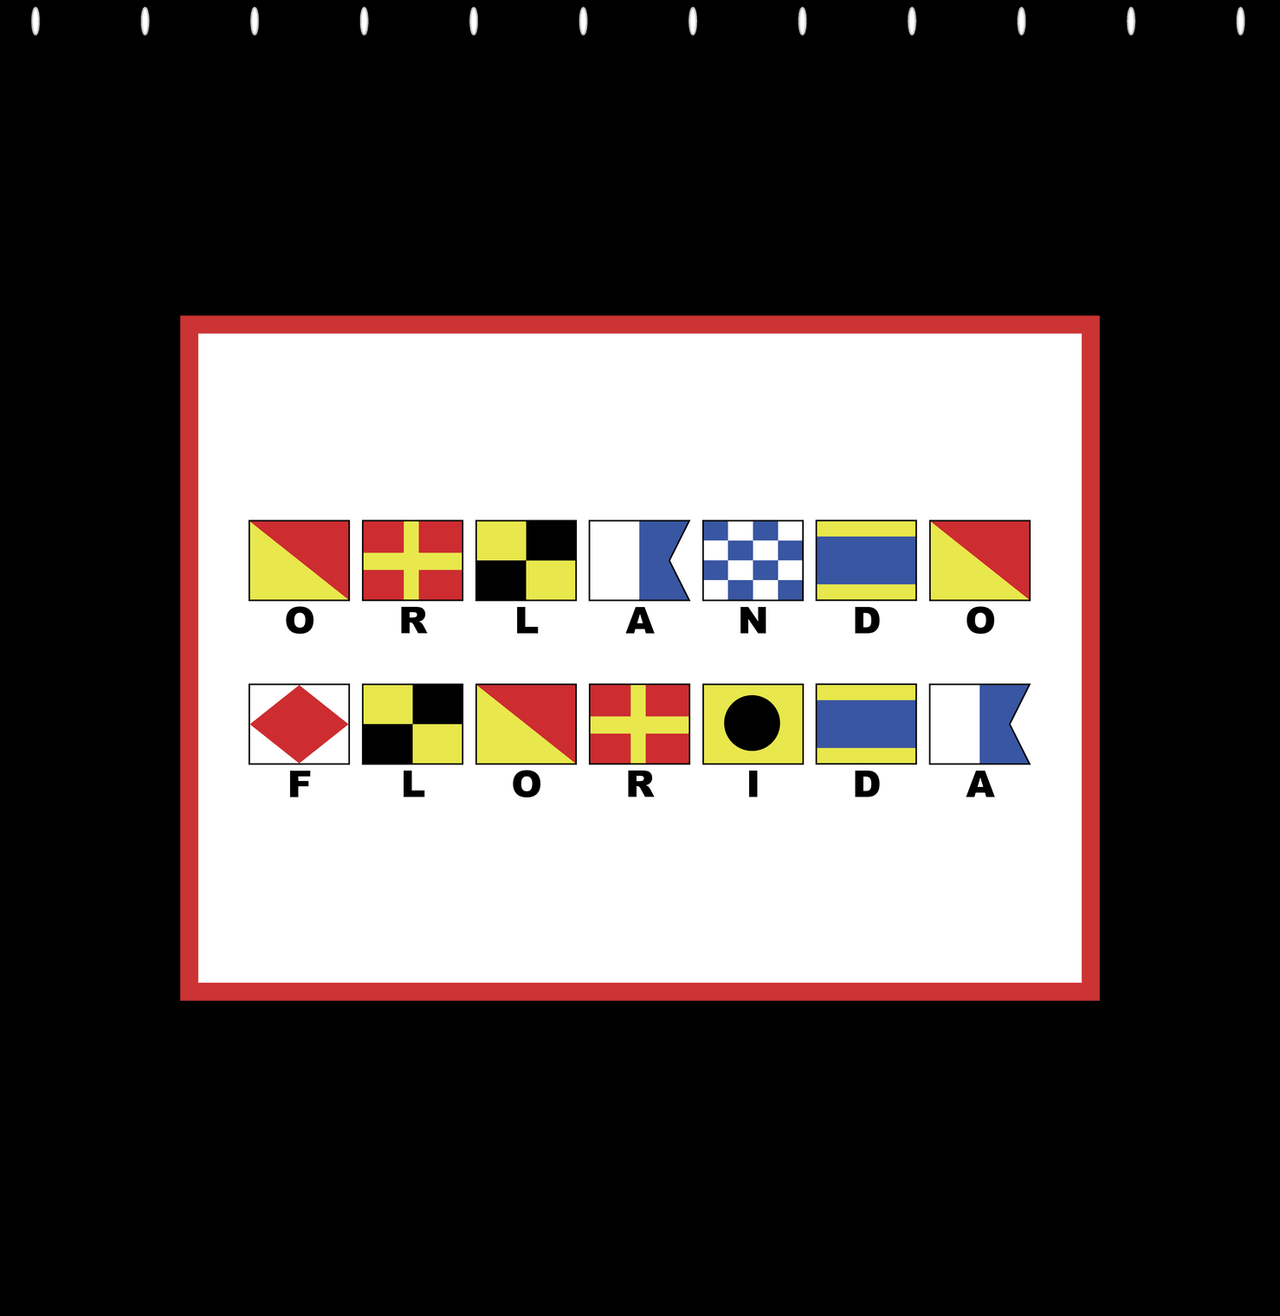 Personalized Nautical Flags Shower Curtain - Black and Red - Flags With Small Letters - Decorate View